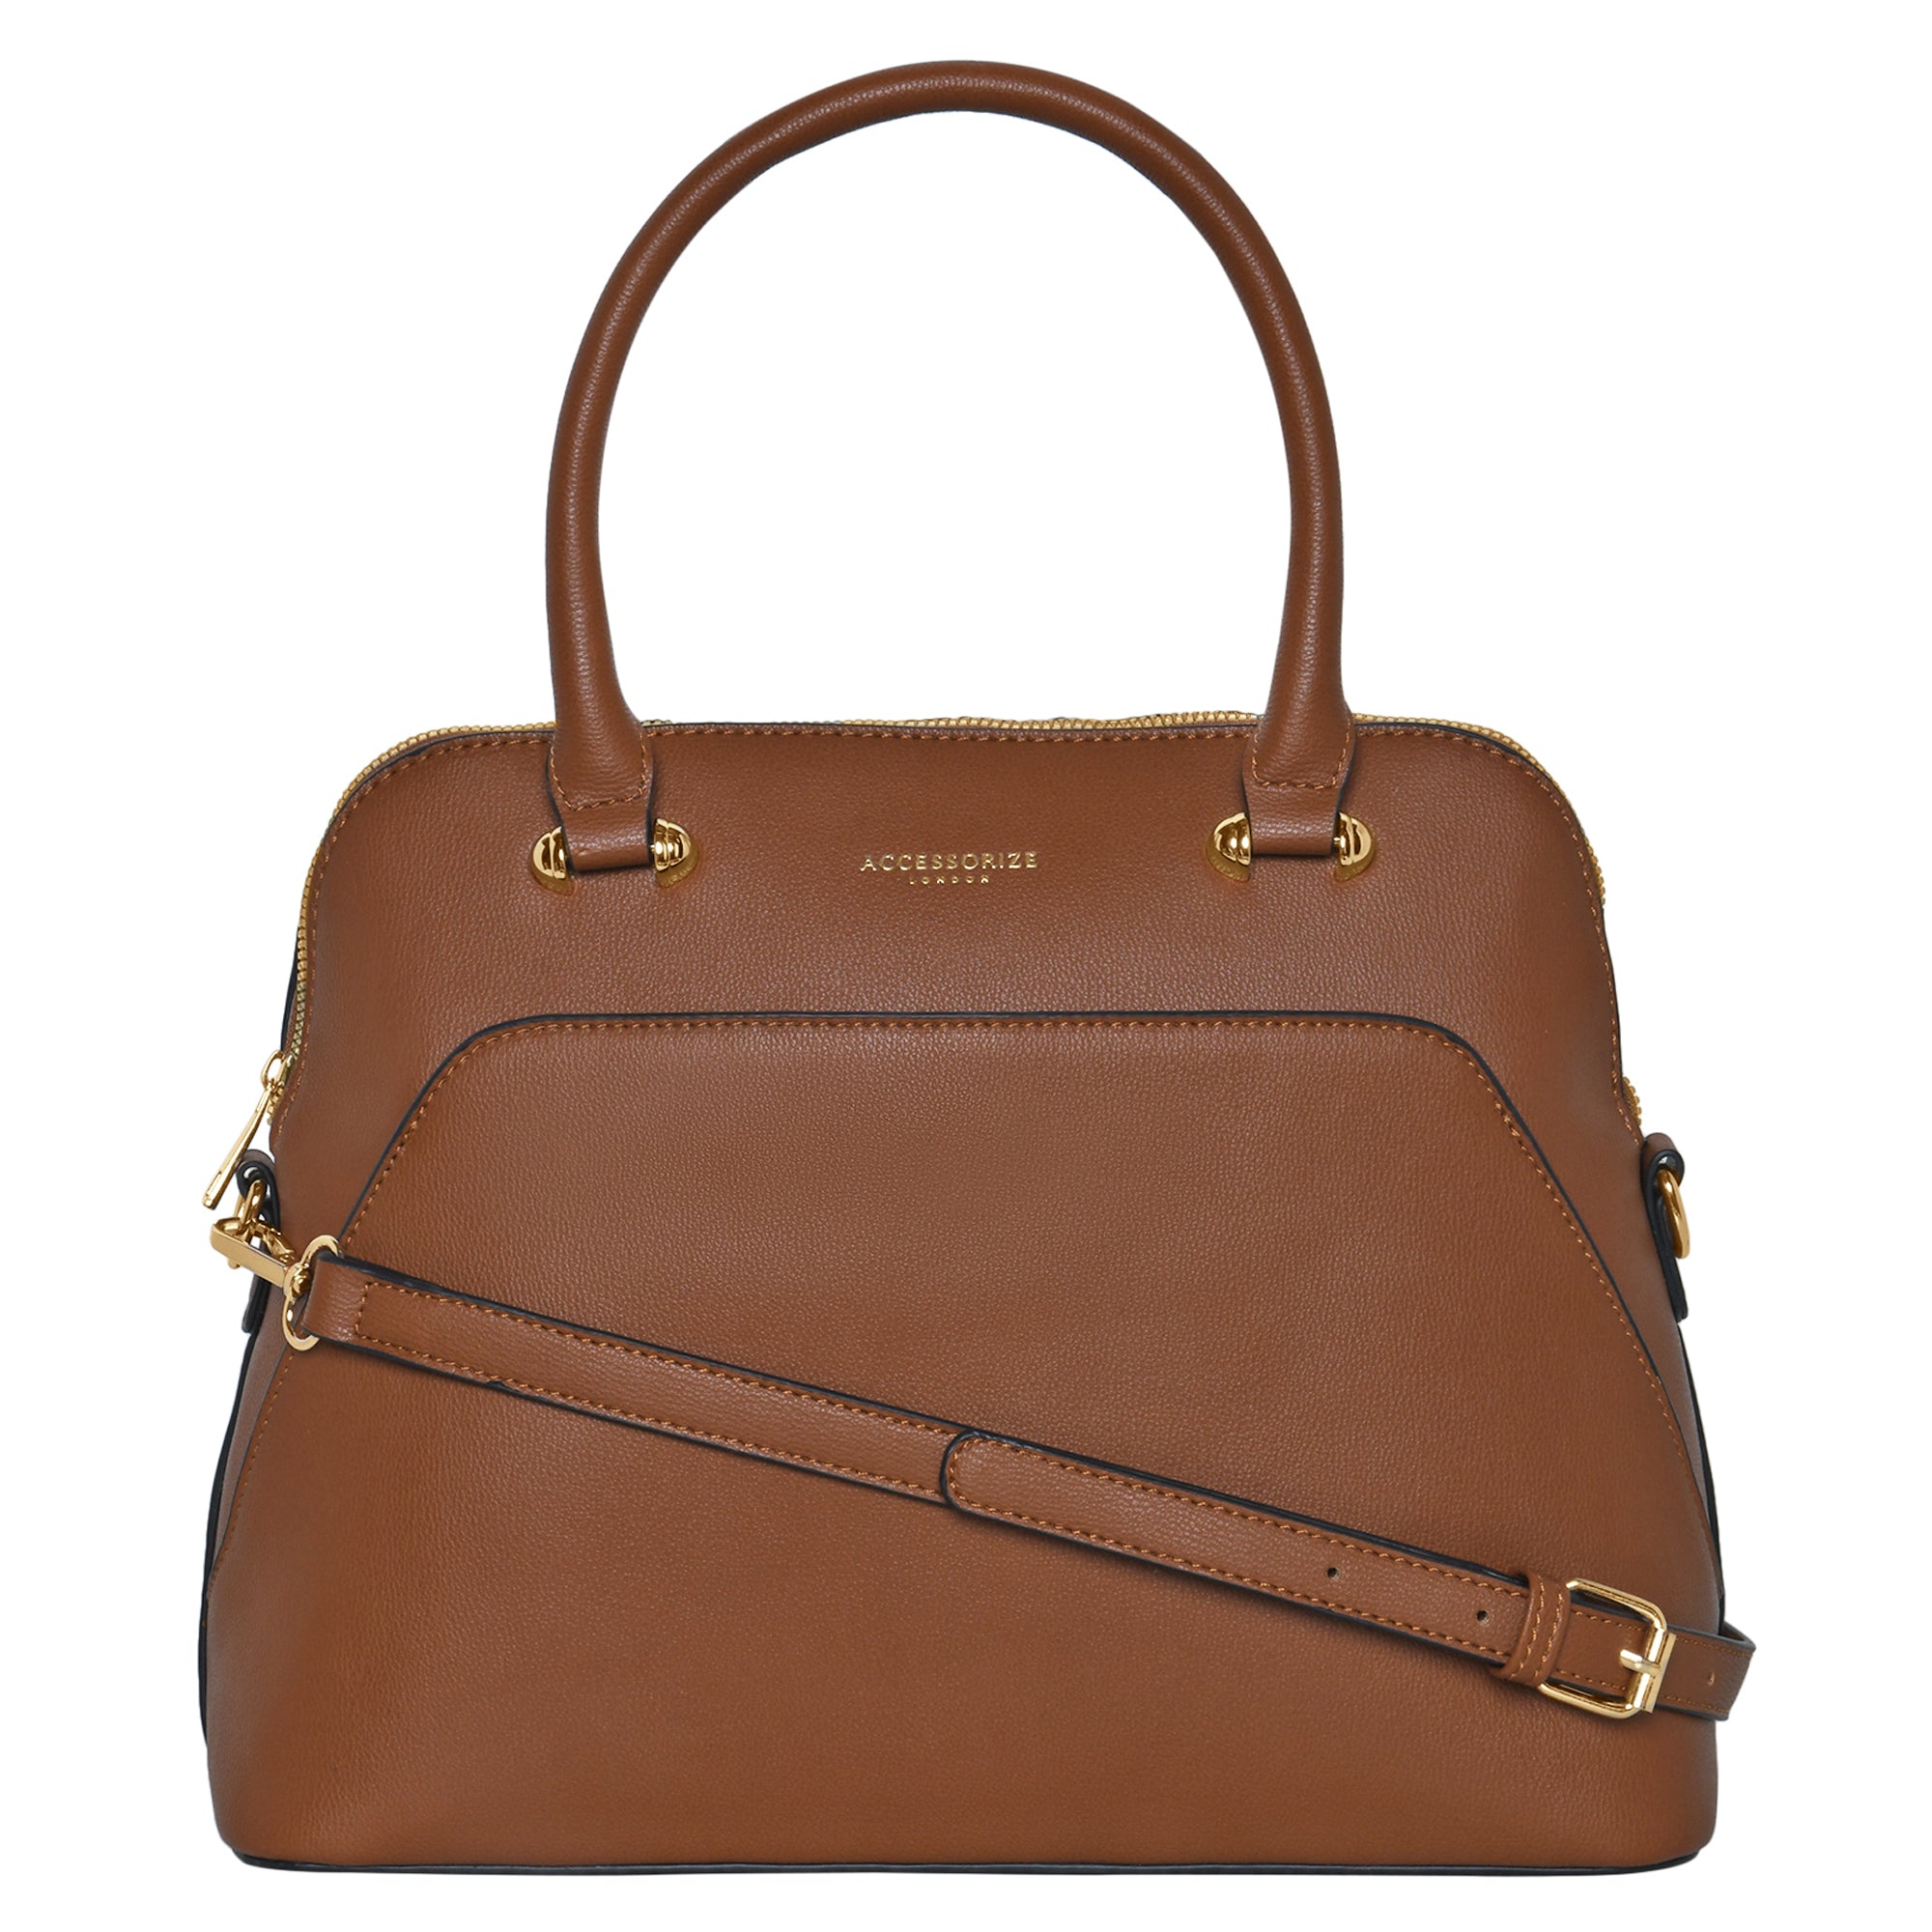 Harpa women's bags Shop for stylish bags and cases online at ZALANDO